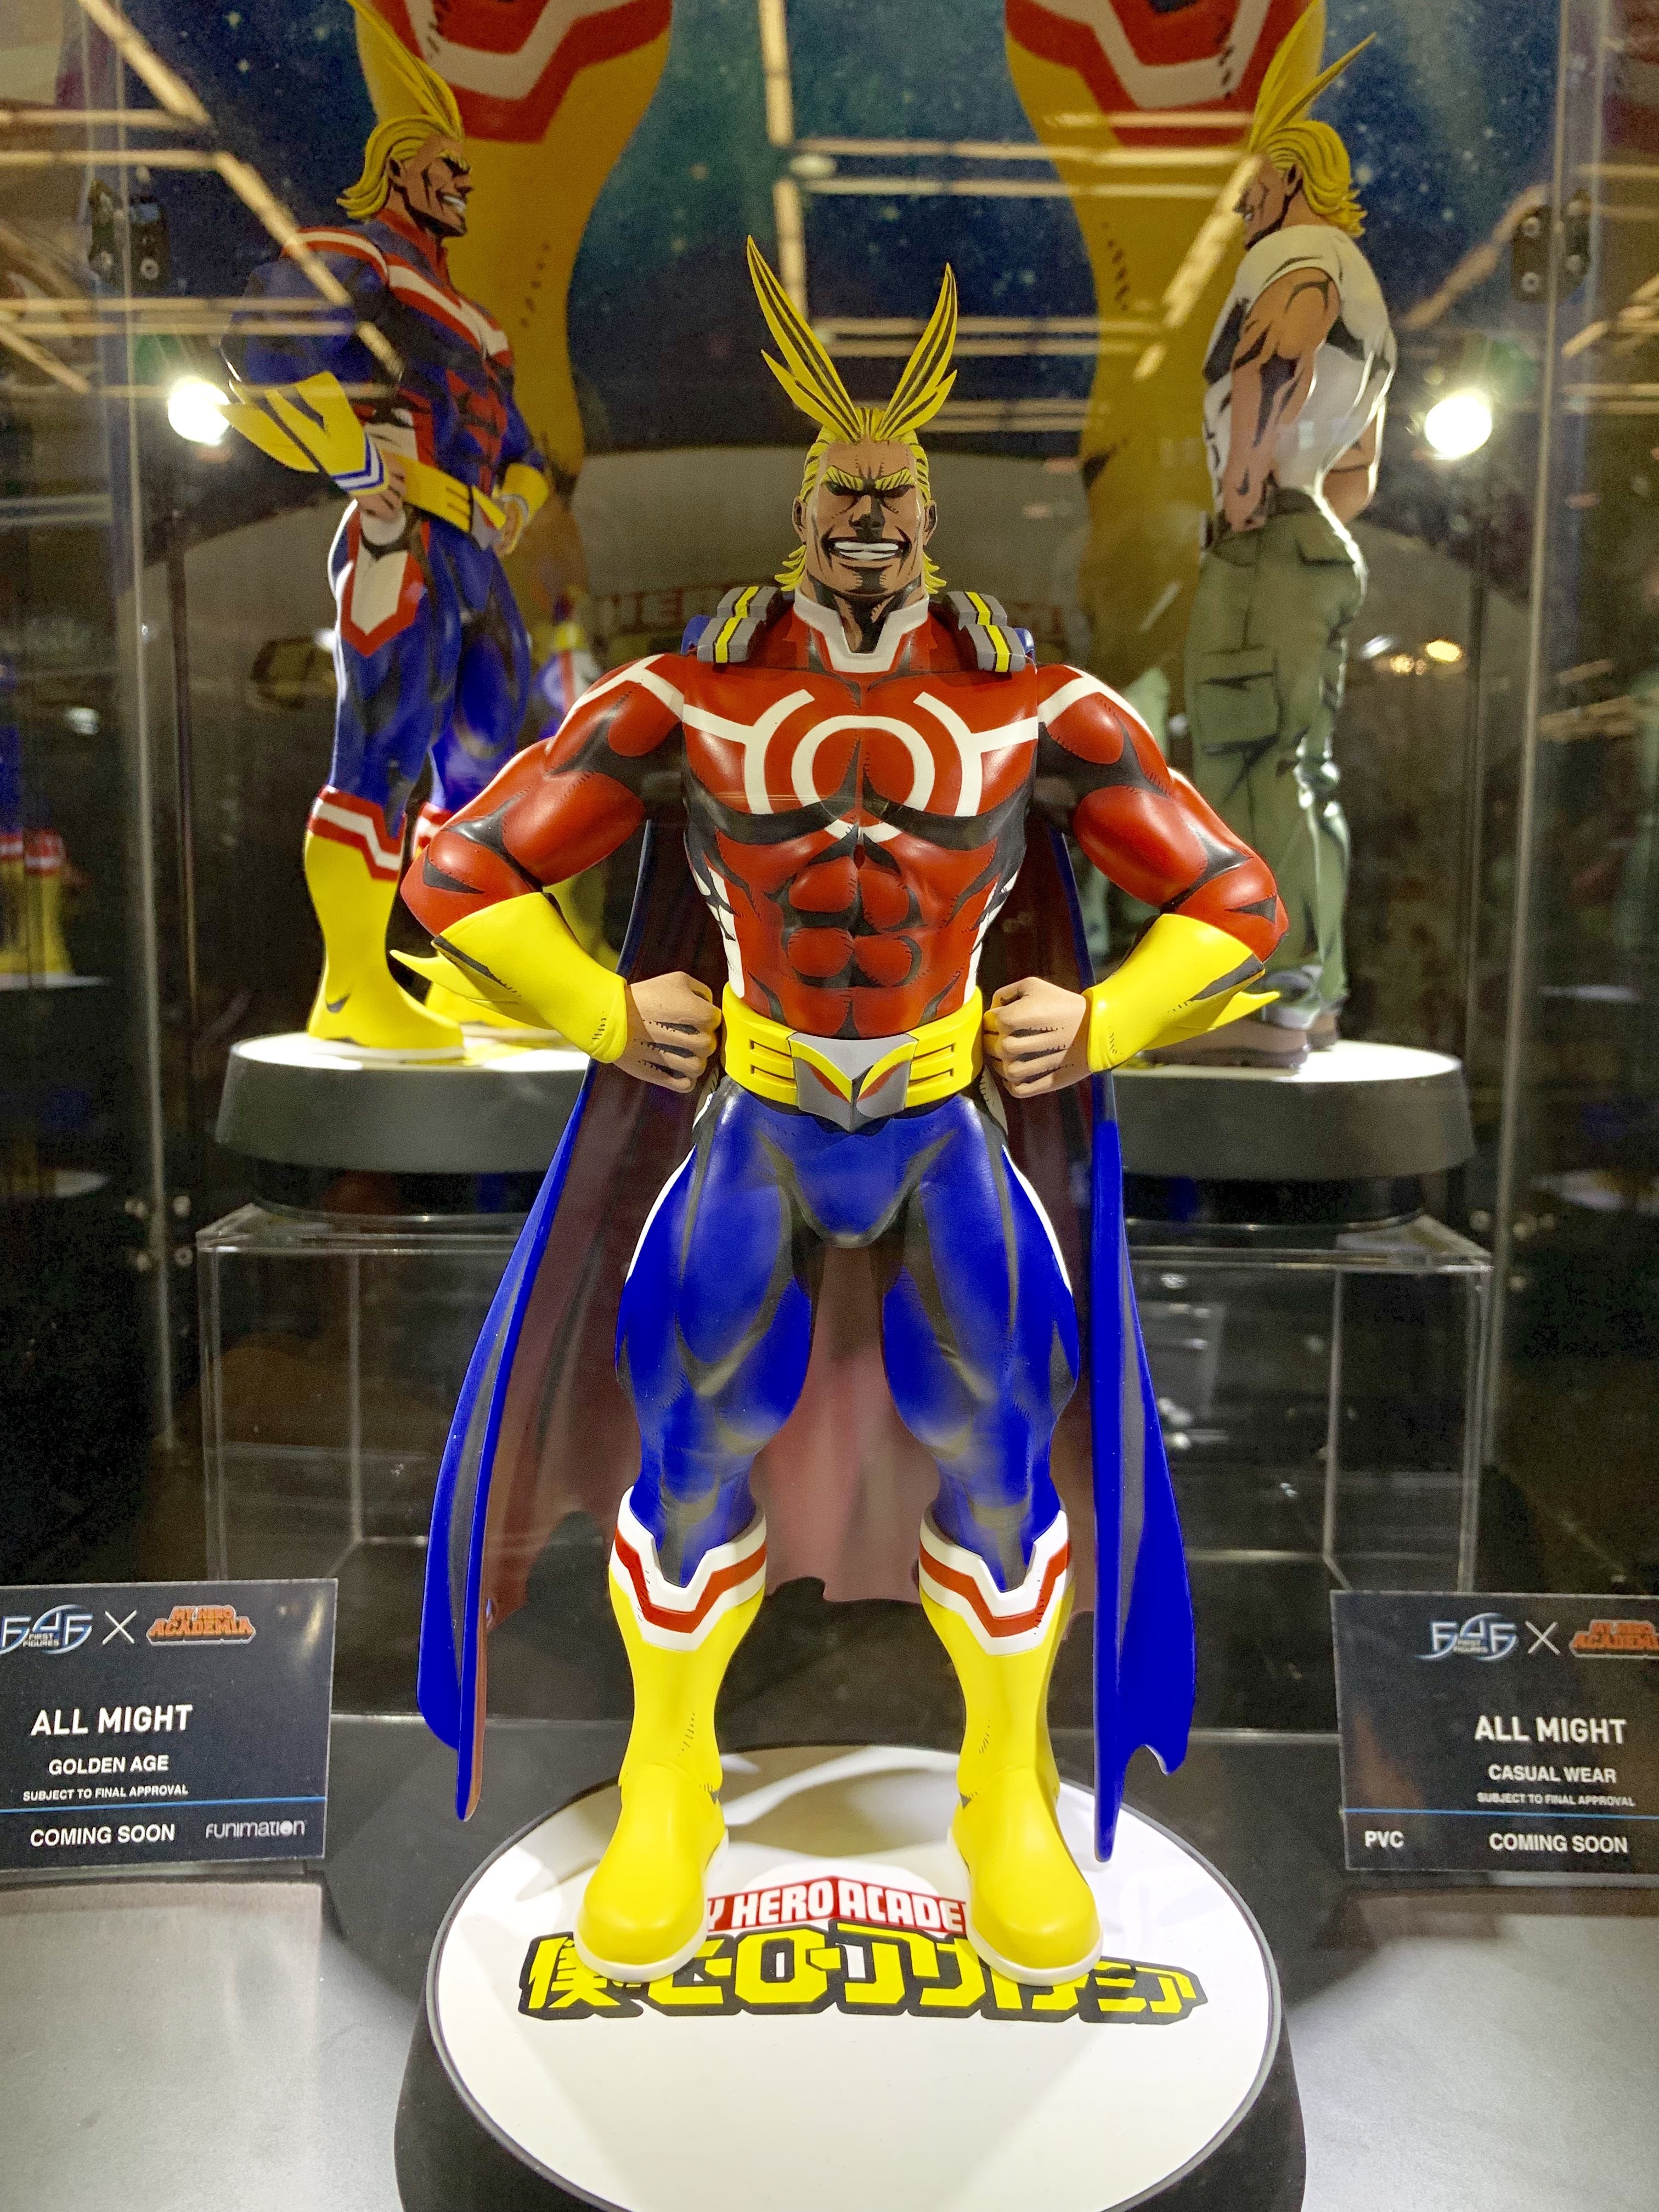 All Might Action Figure at ECCC 2019